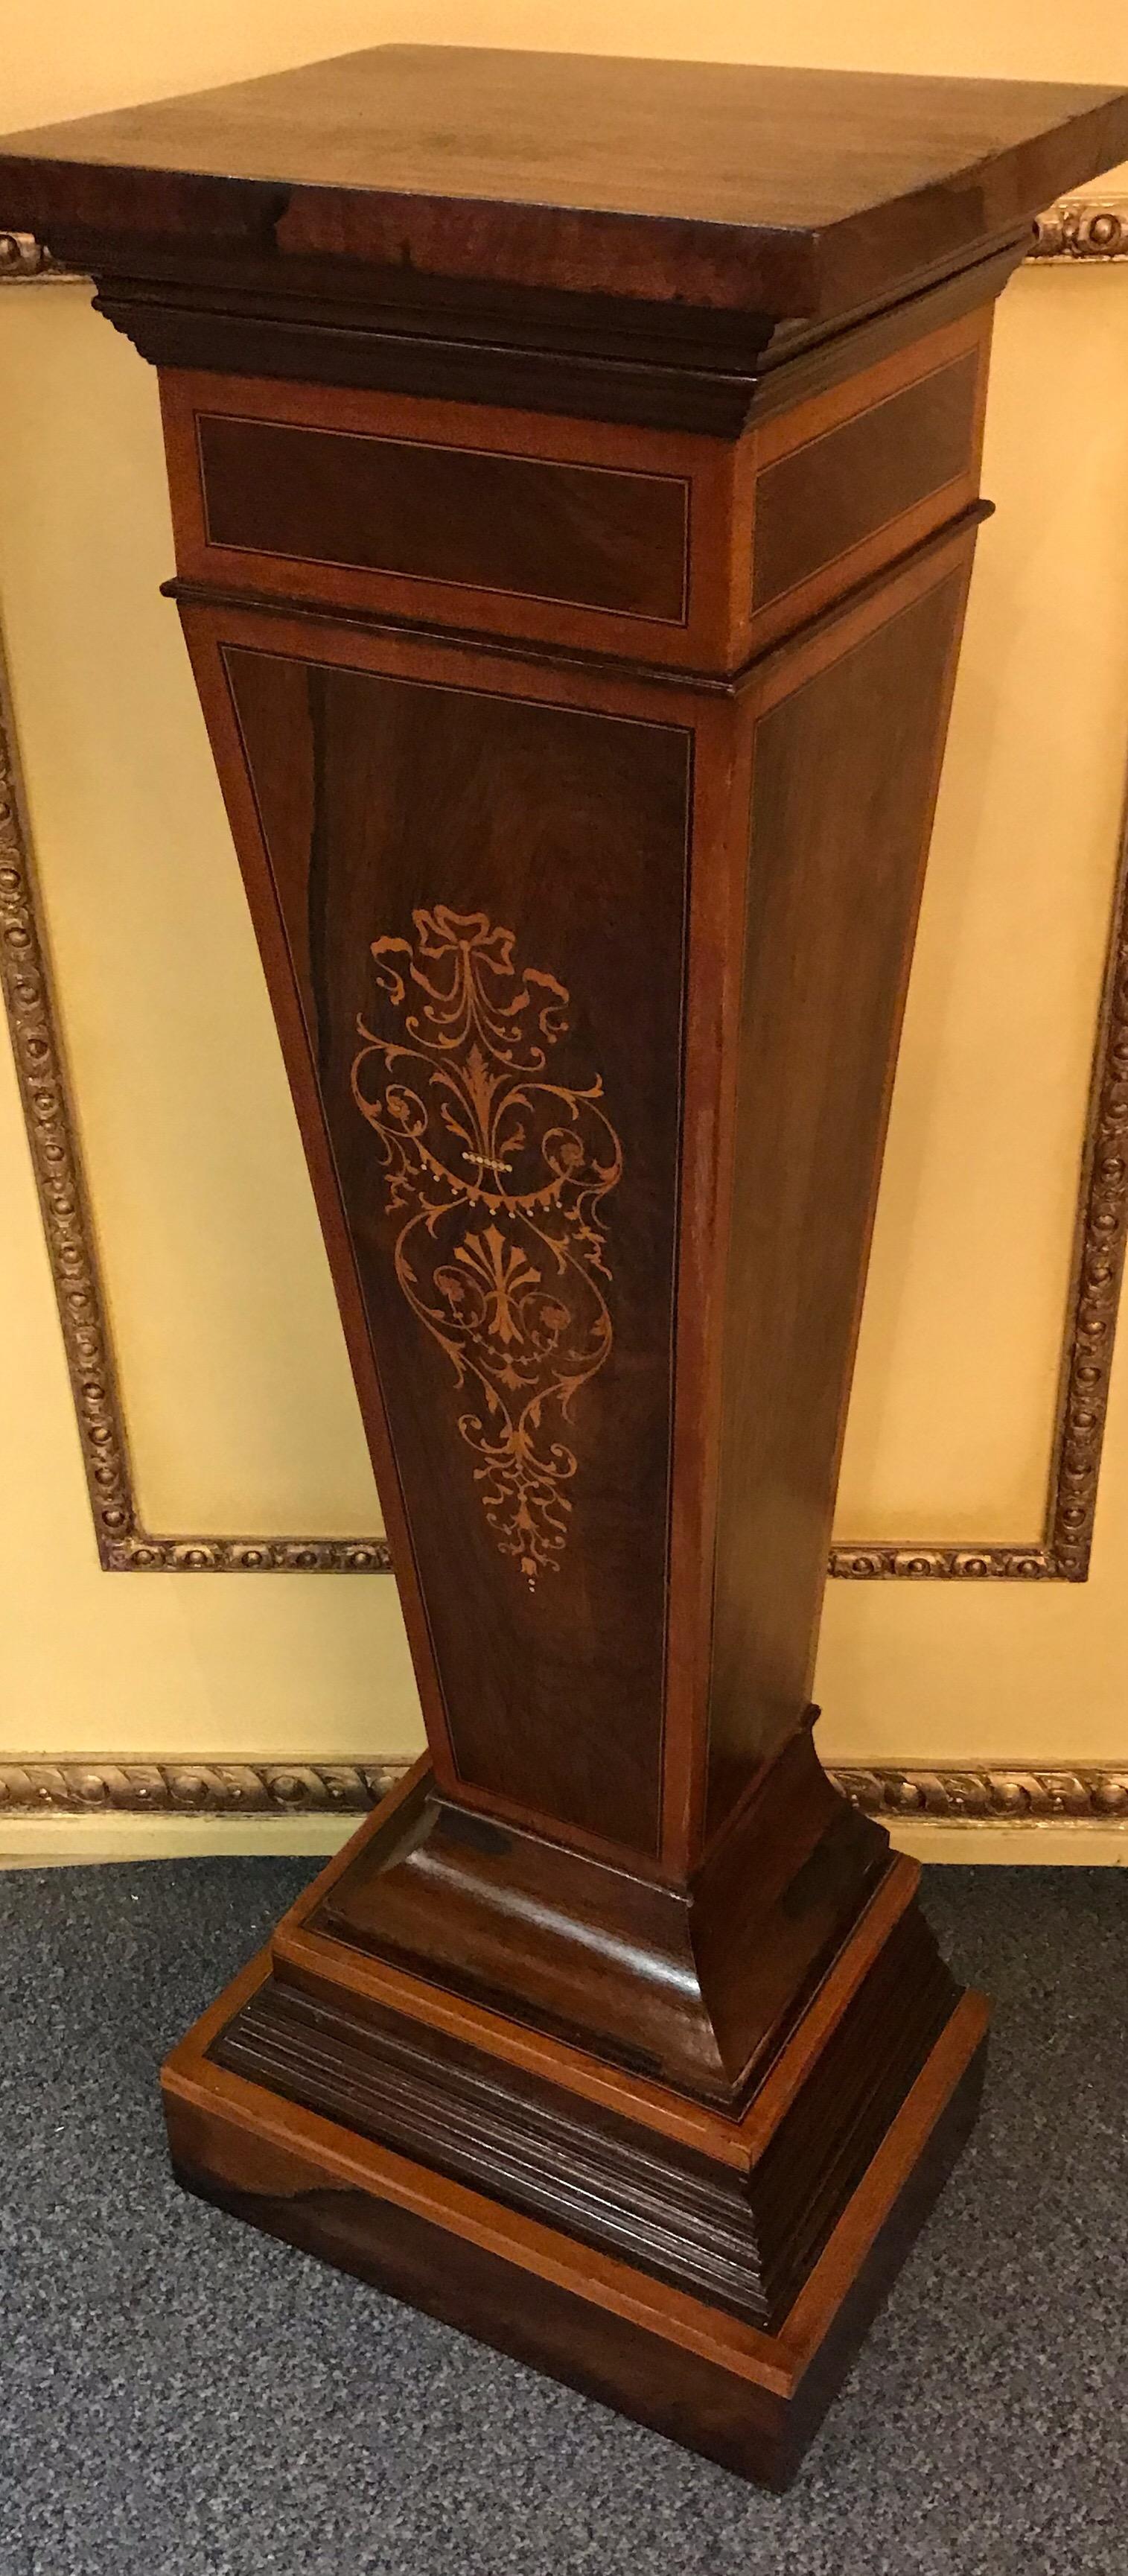 Unique English column pedestal, Victorian. Solid wood with tulip veneer and rich inlaid work.

Profiled and stepped base leg.

(K-).